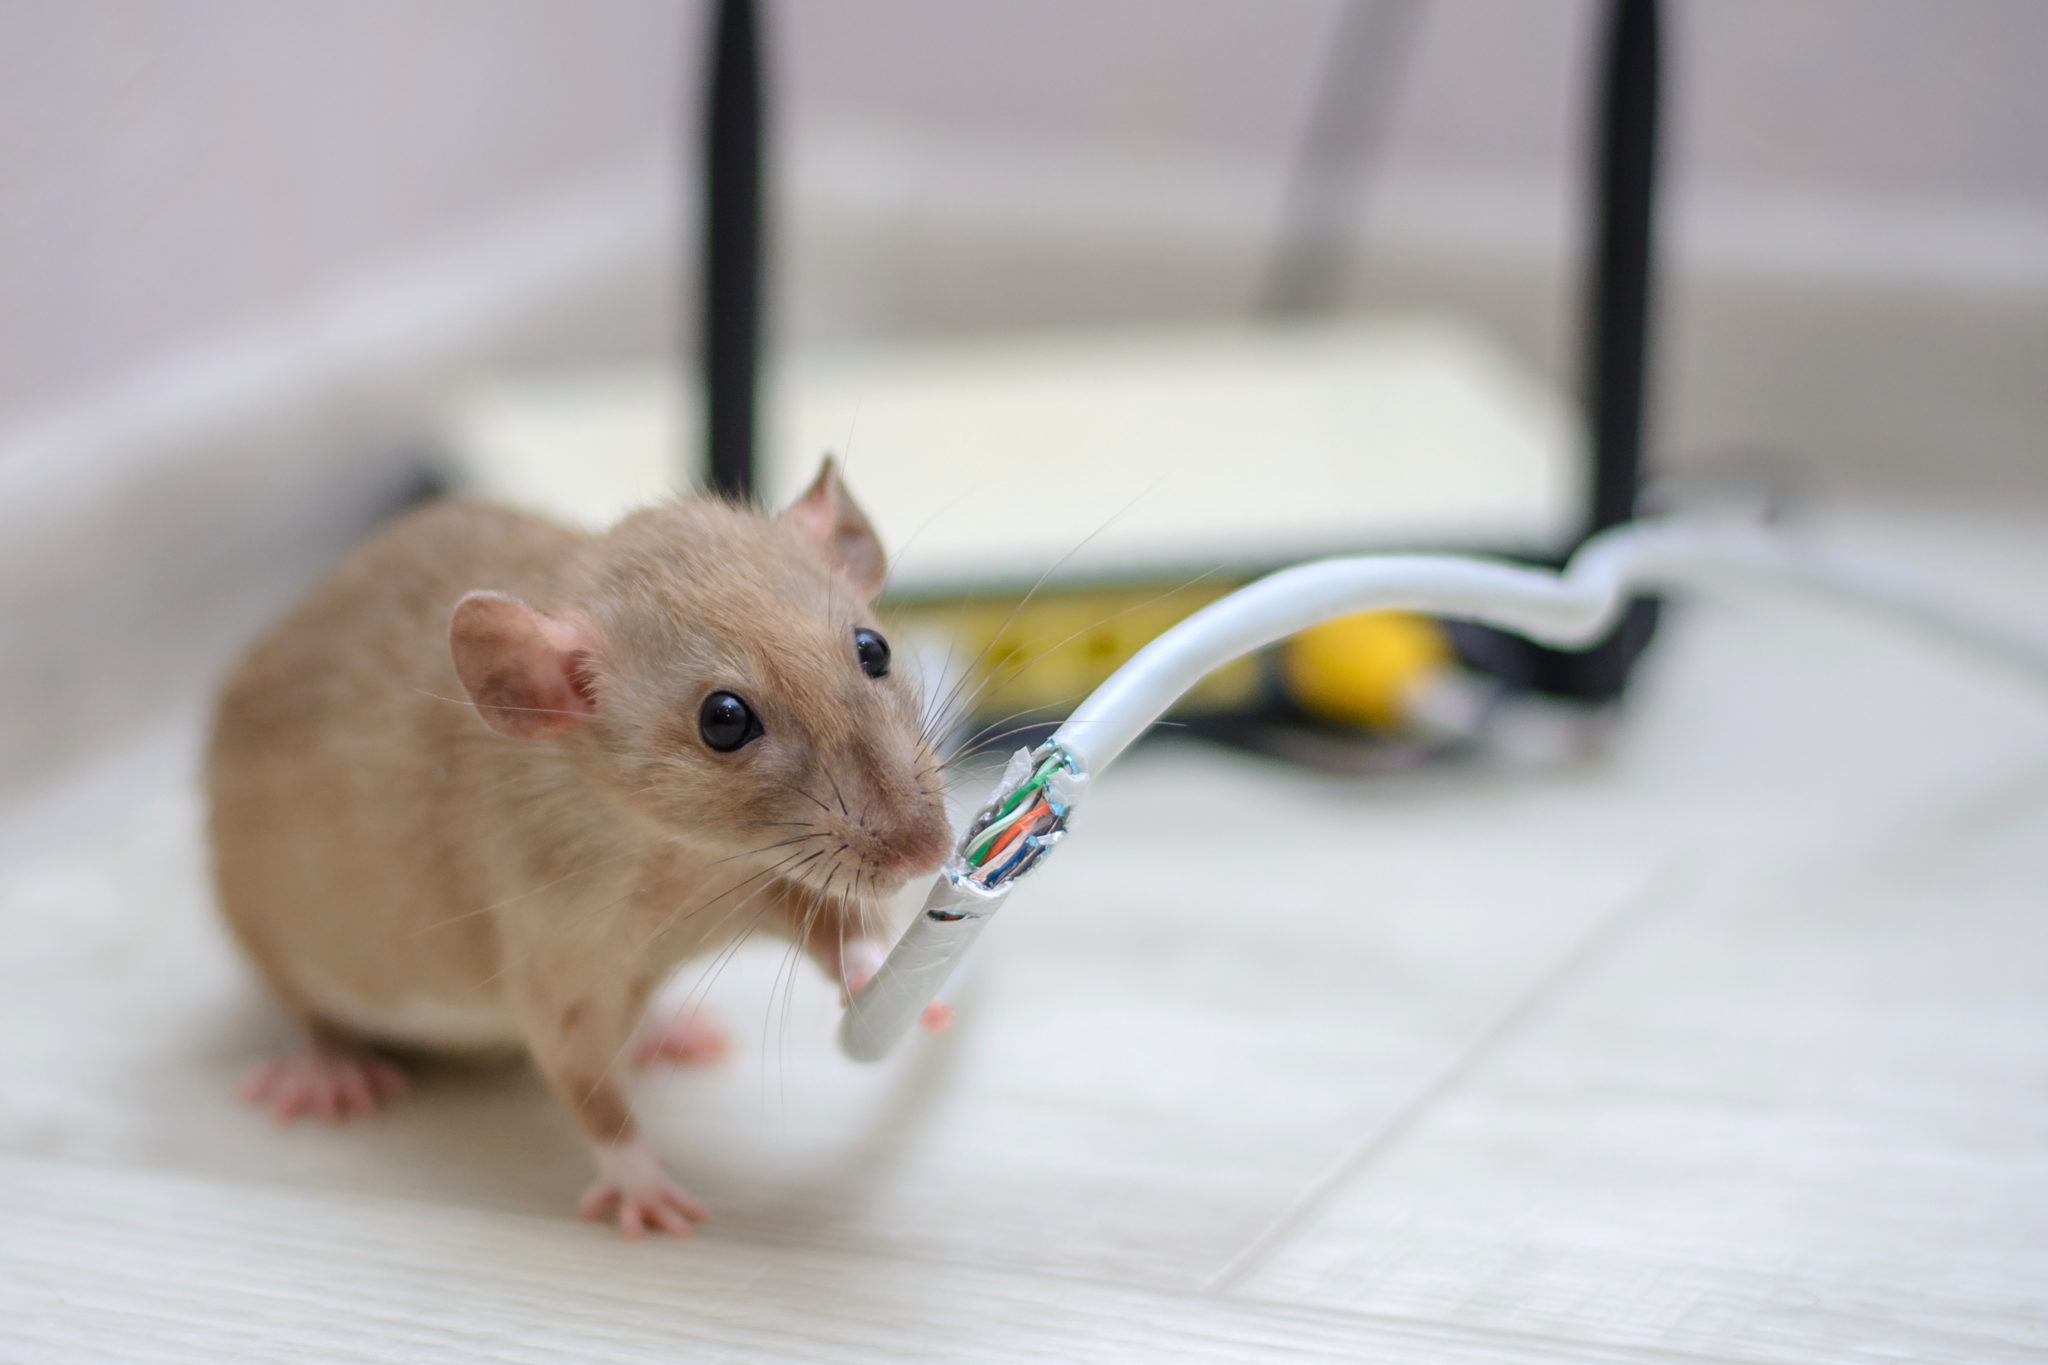 Rodent Pest Control Canberra, Rodent Treatment - Flick Pest Control